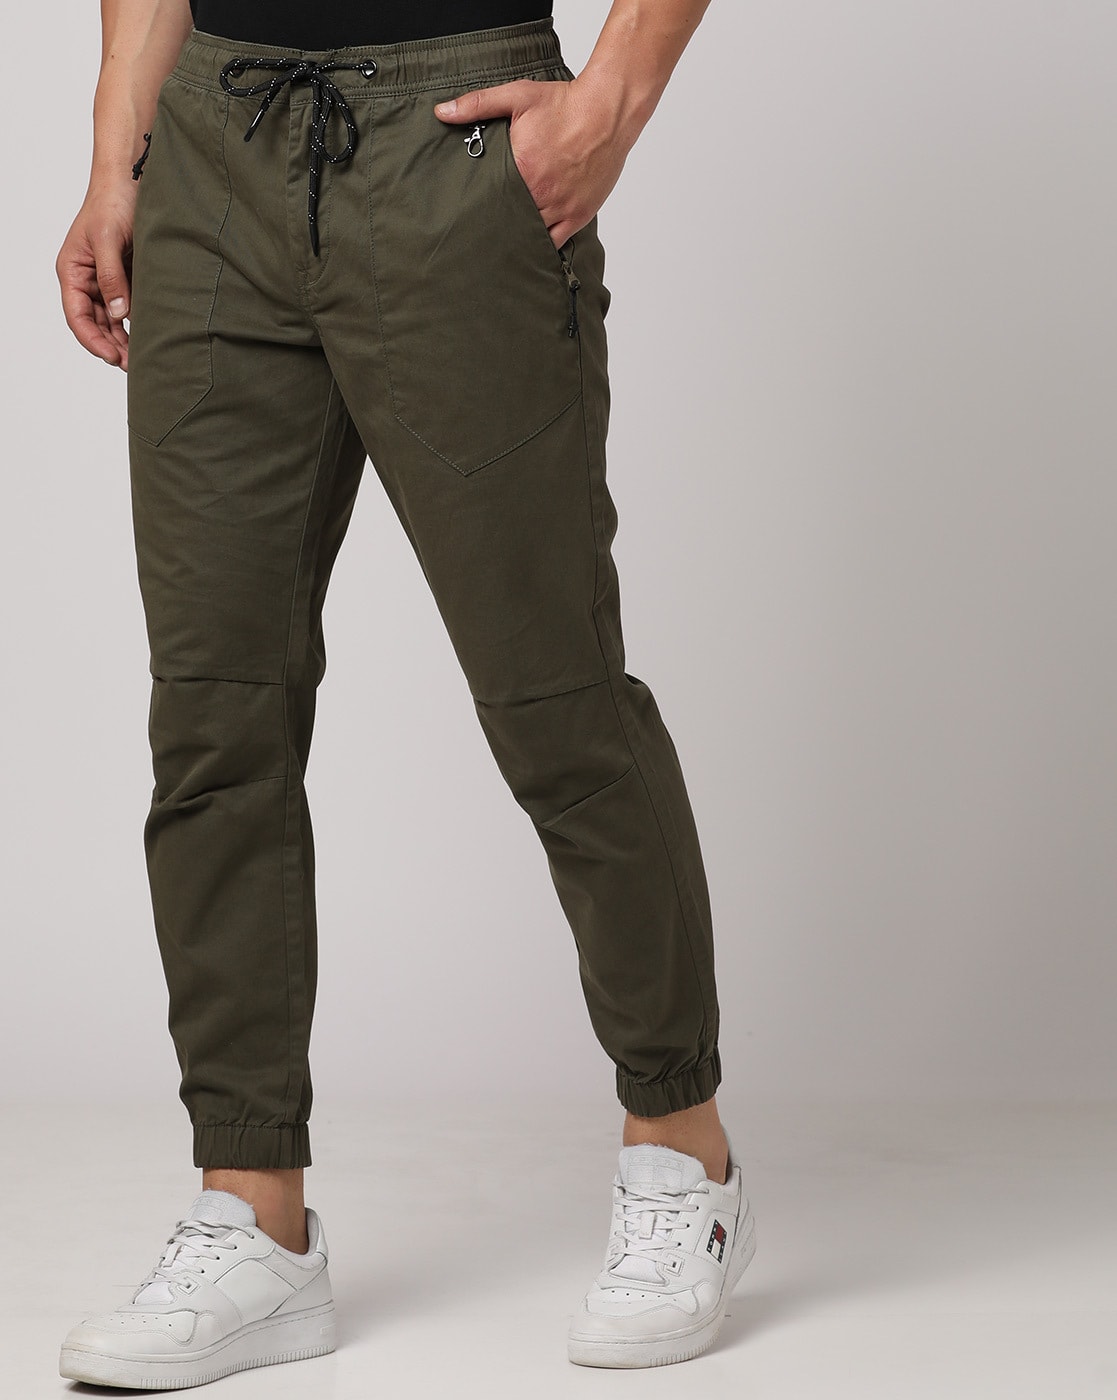 Buy Olive Green Trousers & Pants for Men by Buda Jeans Co Online